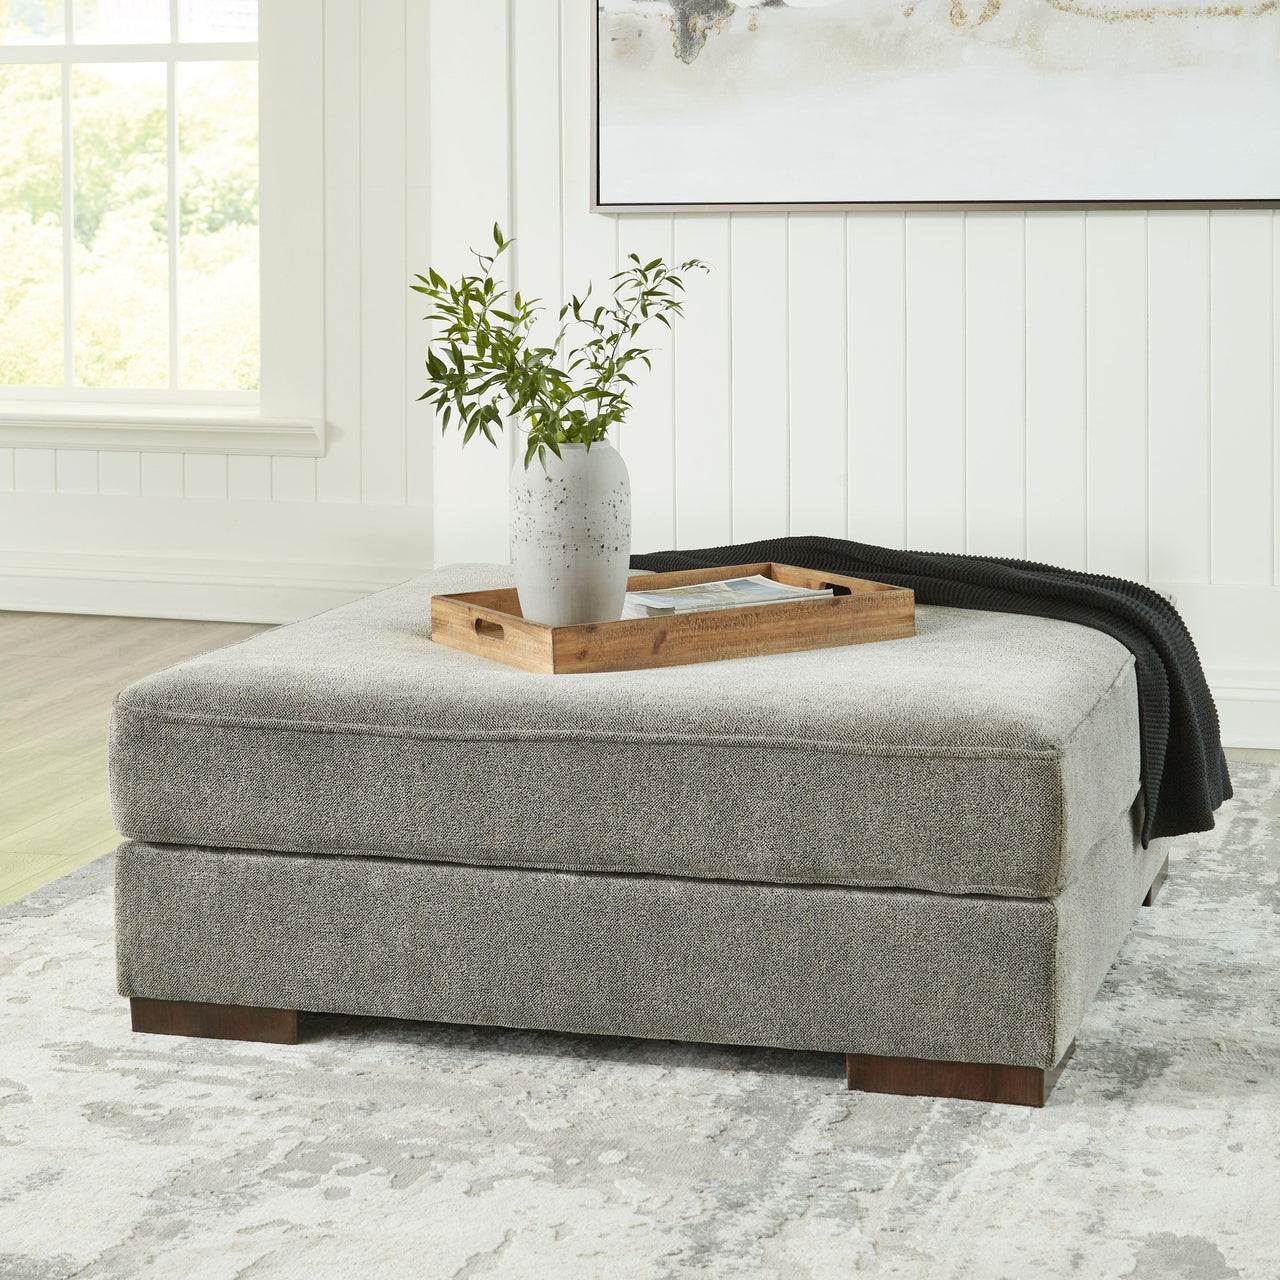 Bayless - Smoke - Oversized Accent Ottoman Tony's Home Furnishings Furniture. Beds. Dressers. Sofas.